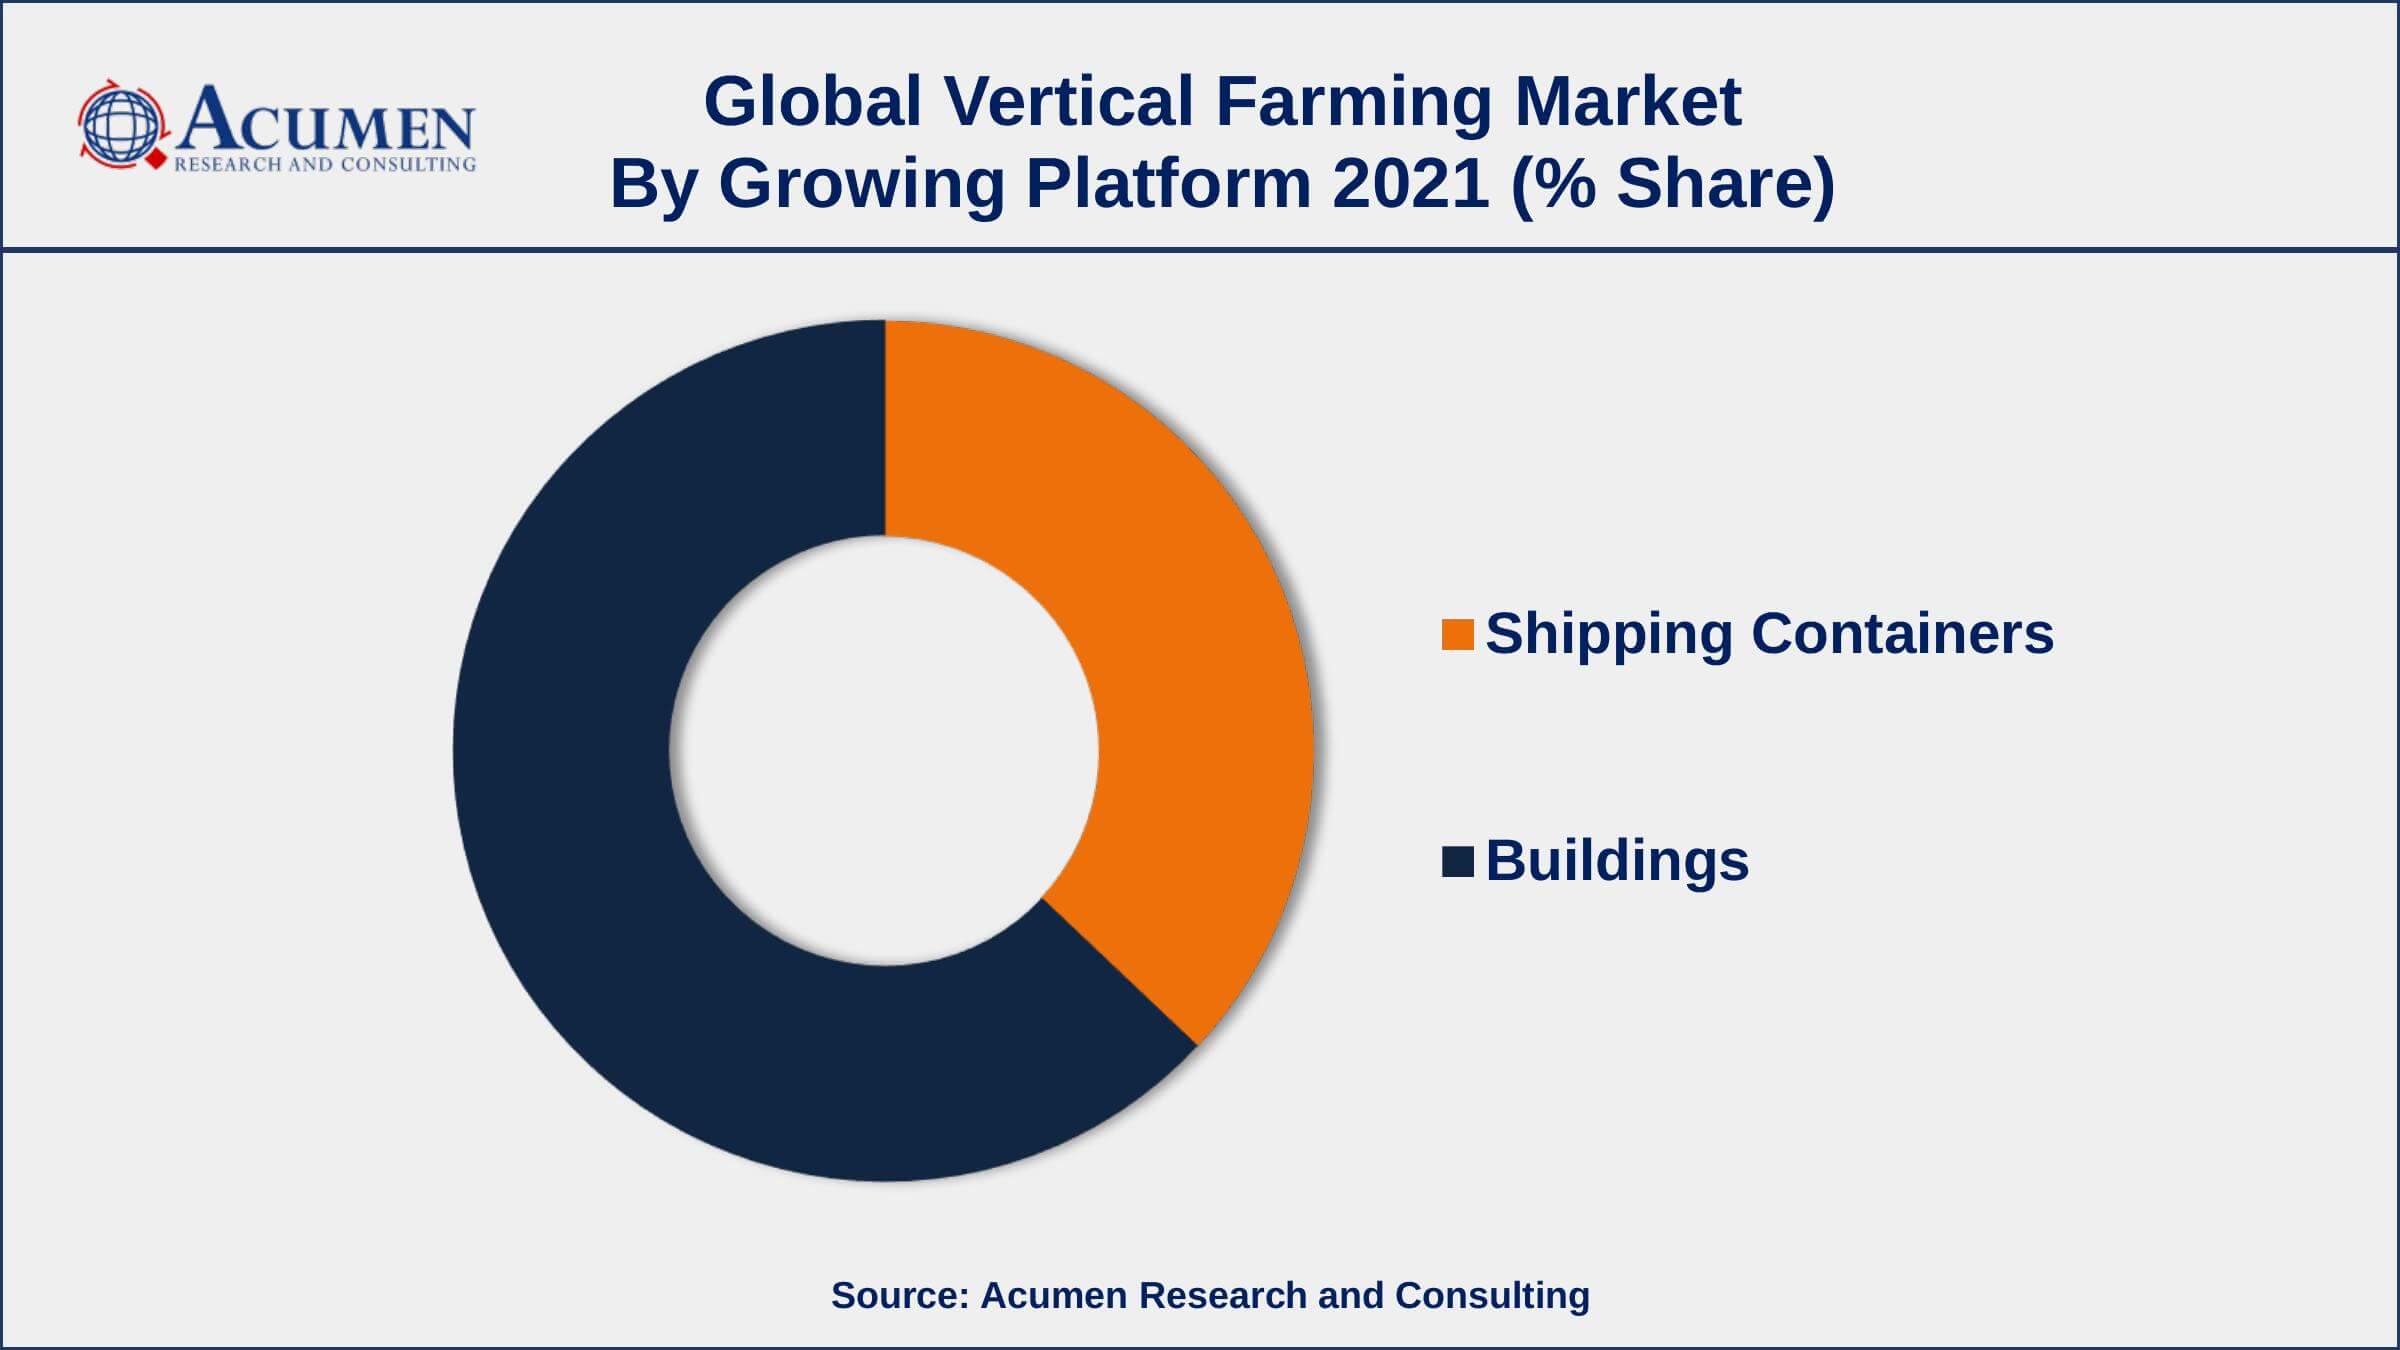 High yield compared to conventional farming is tied to vertical farming, drives the vertical farming market size